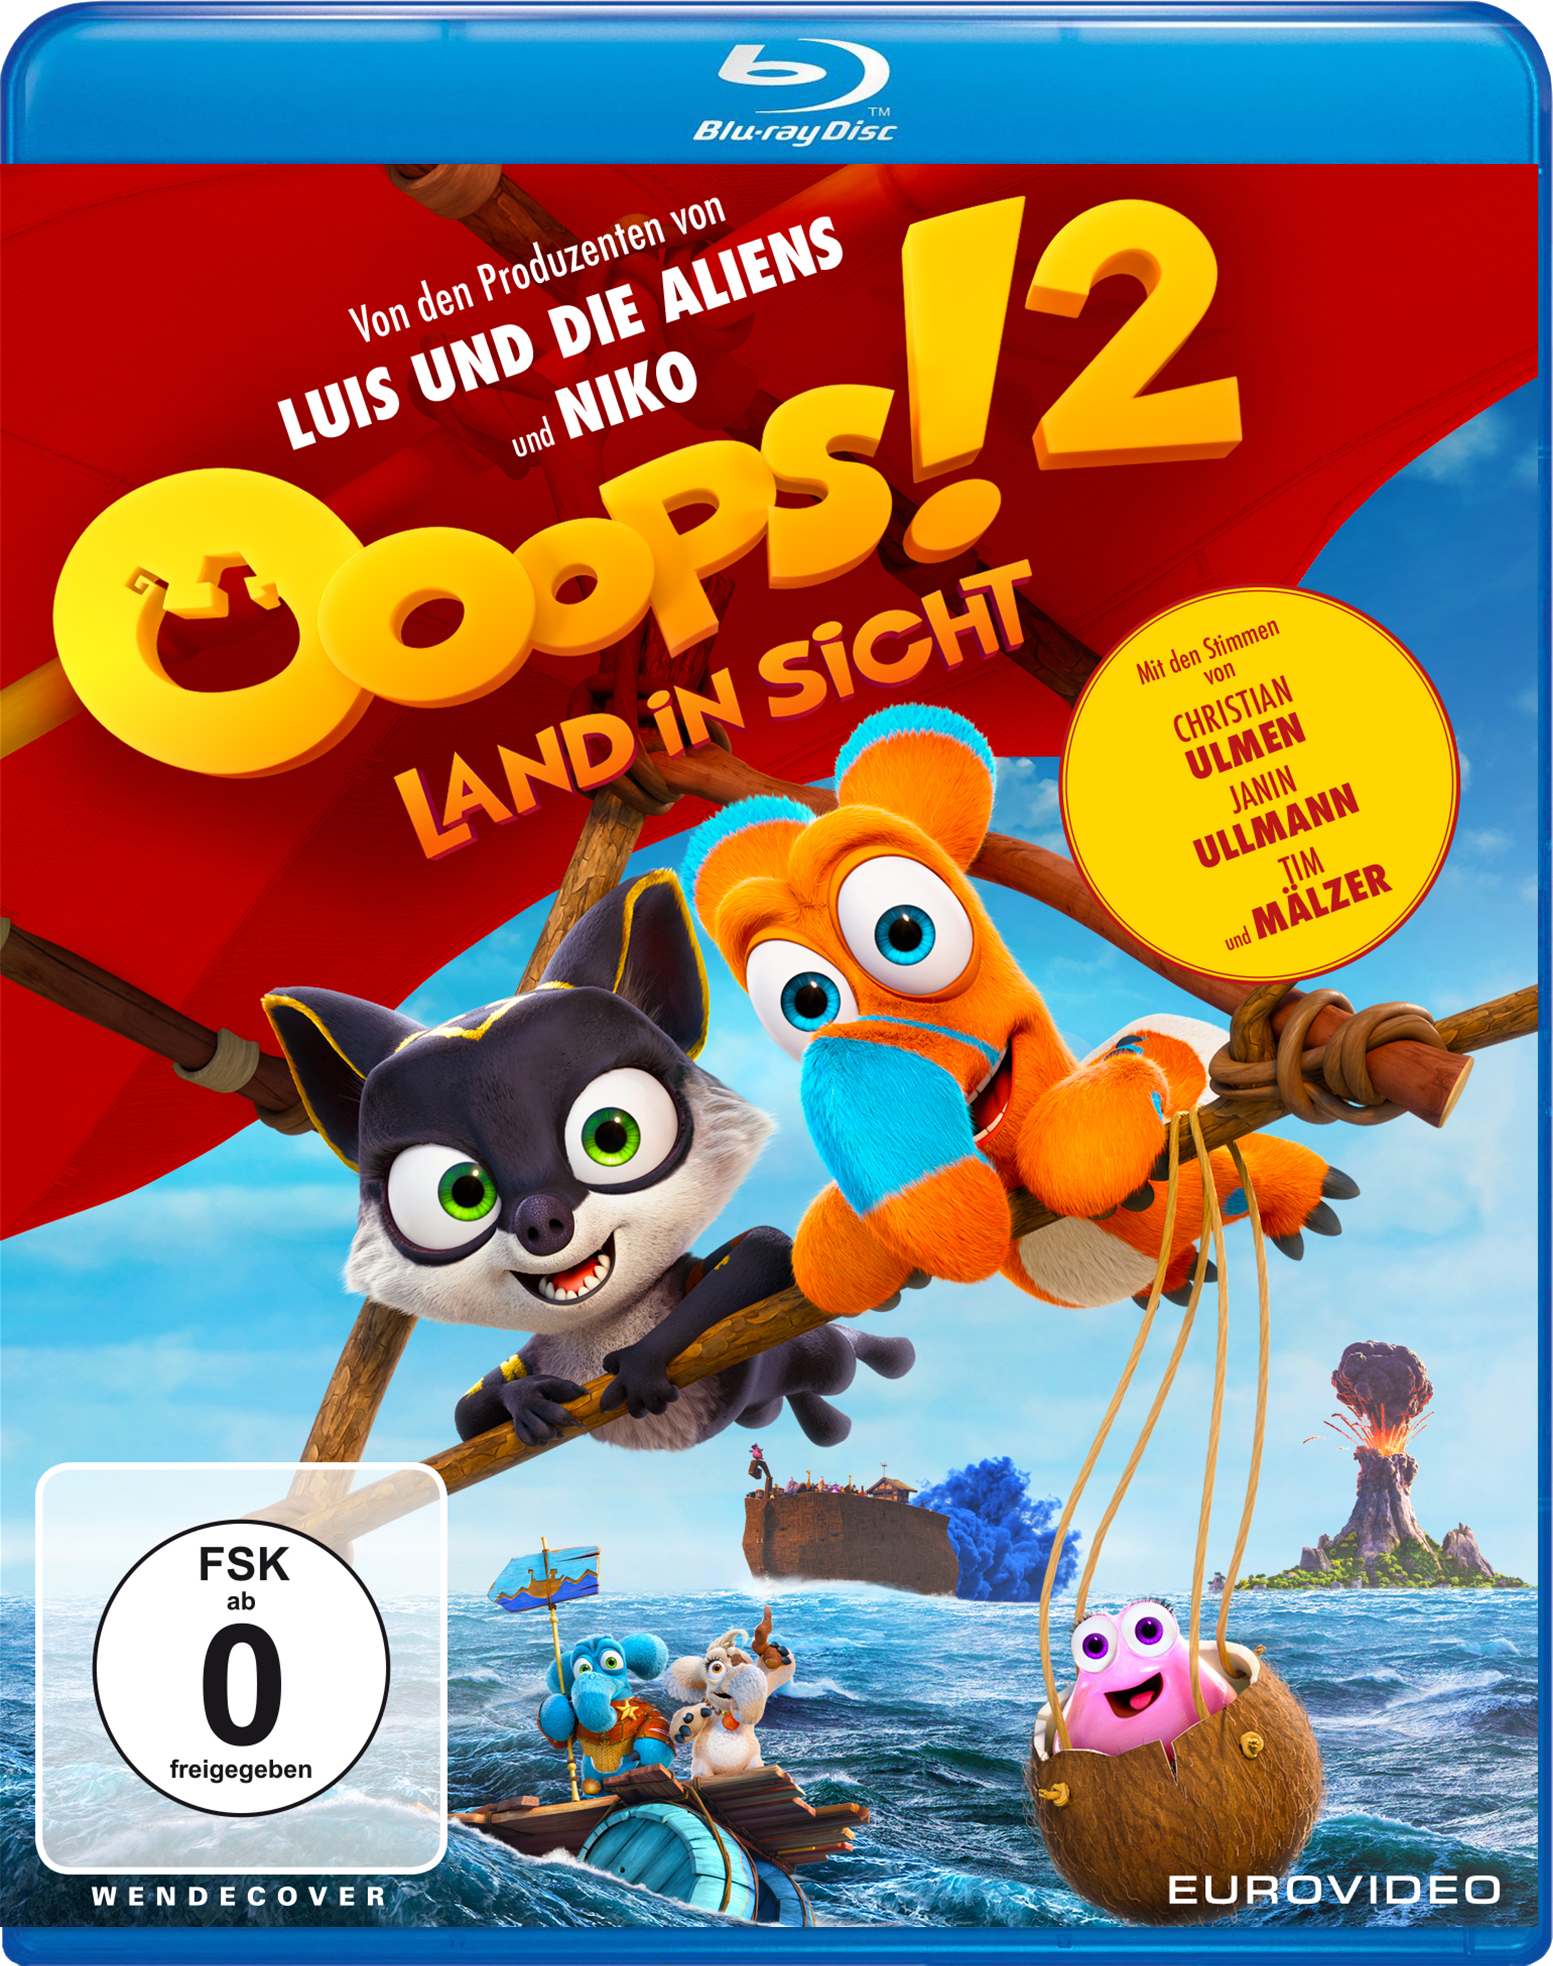 Ooops! 2 - Blu-ray in Land Sicht